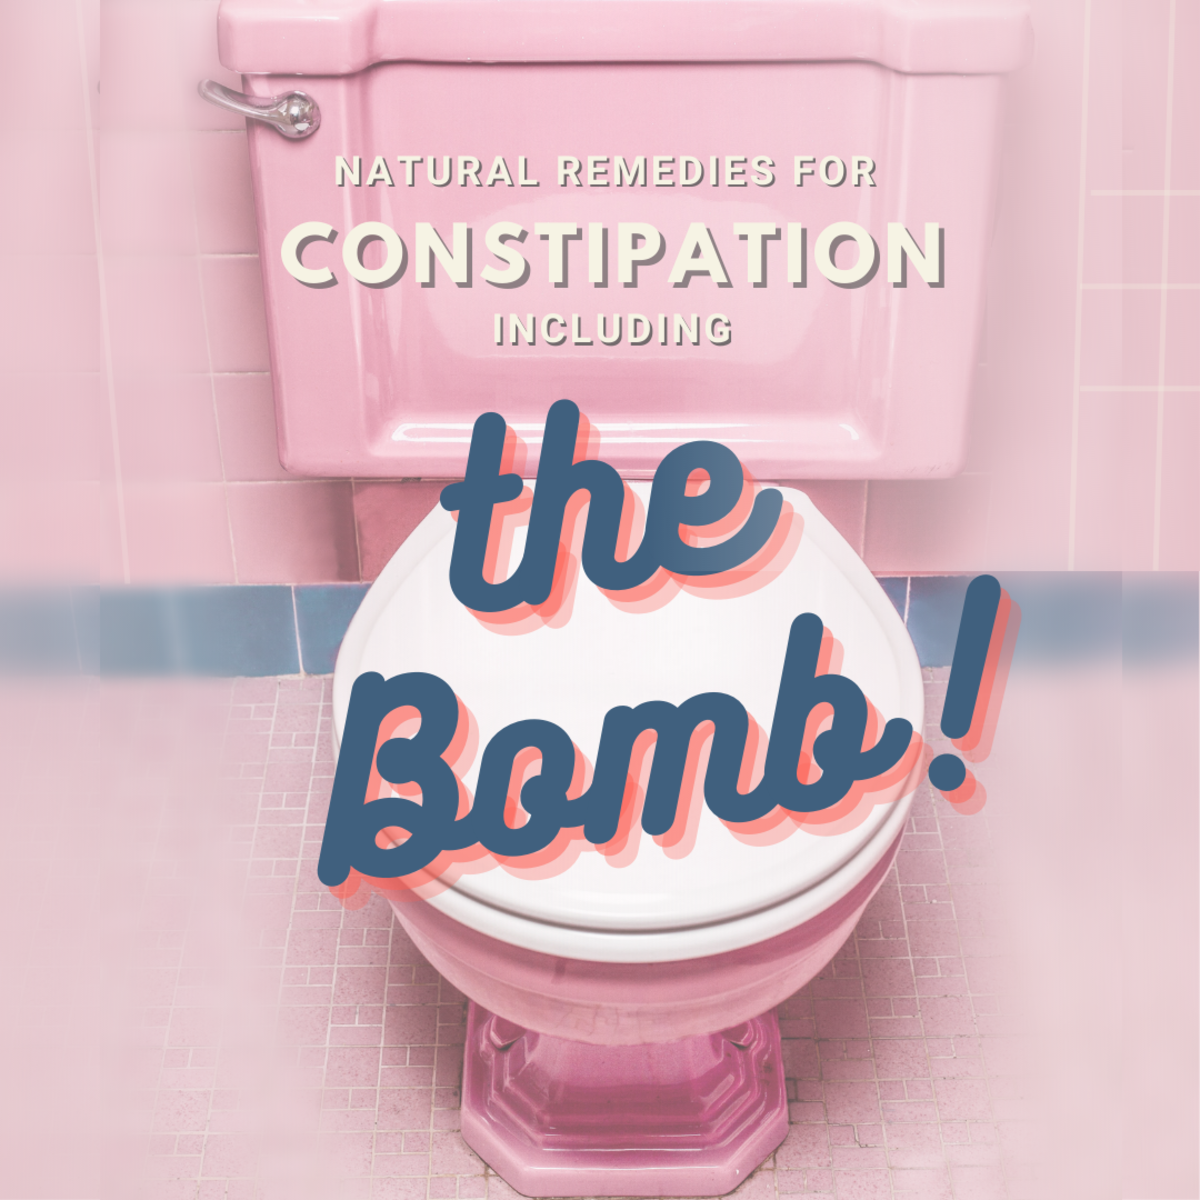 10 Best Natural Home Remedies for Constipation, Including 